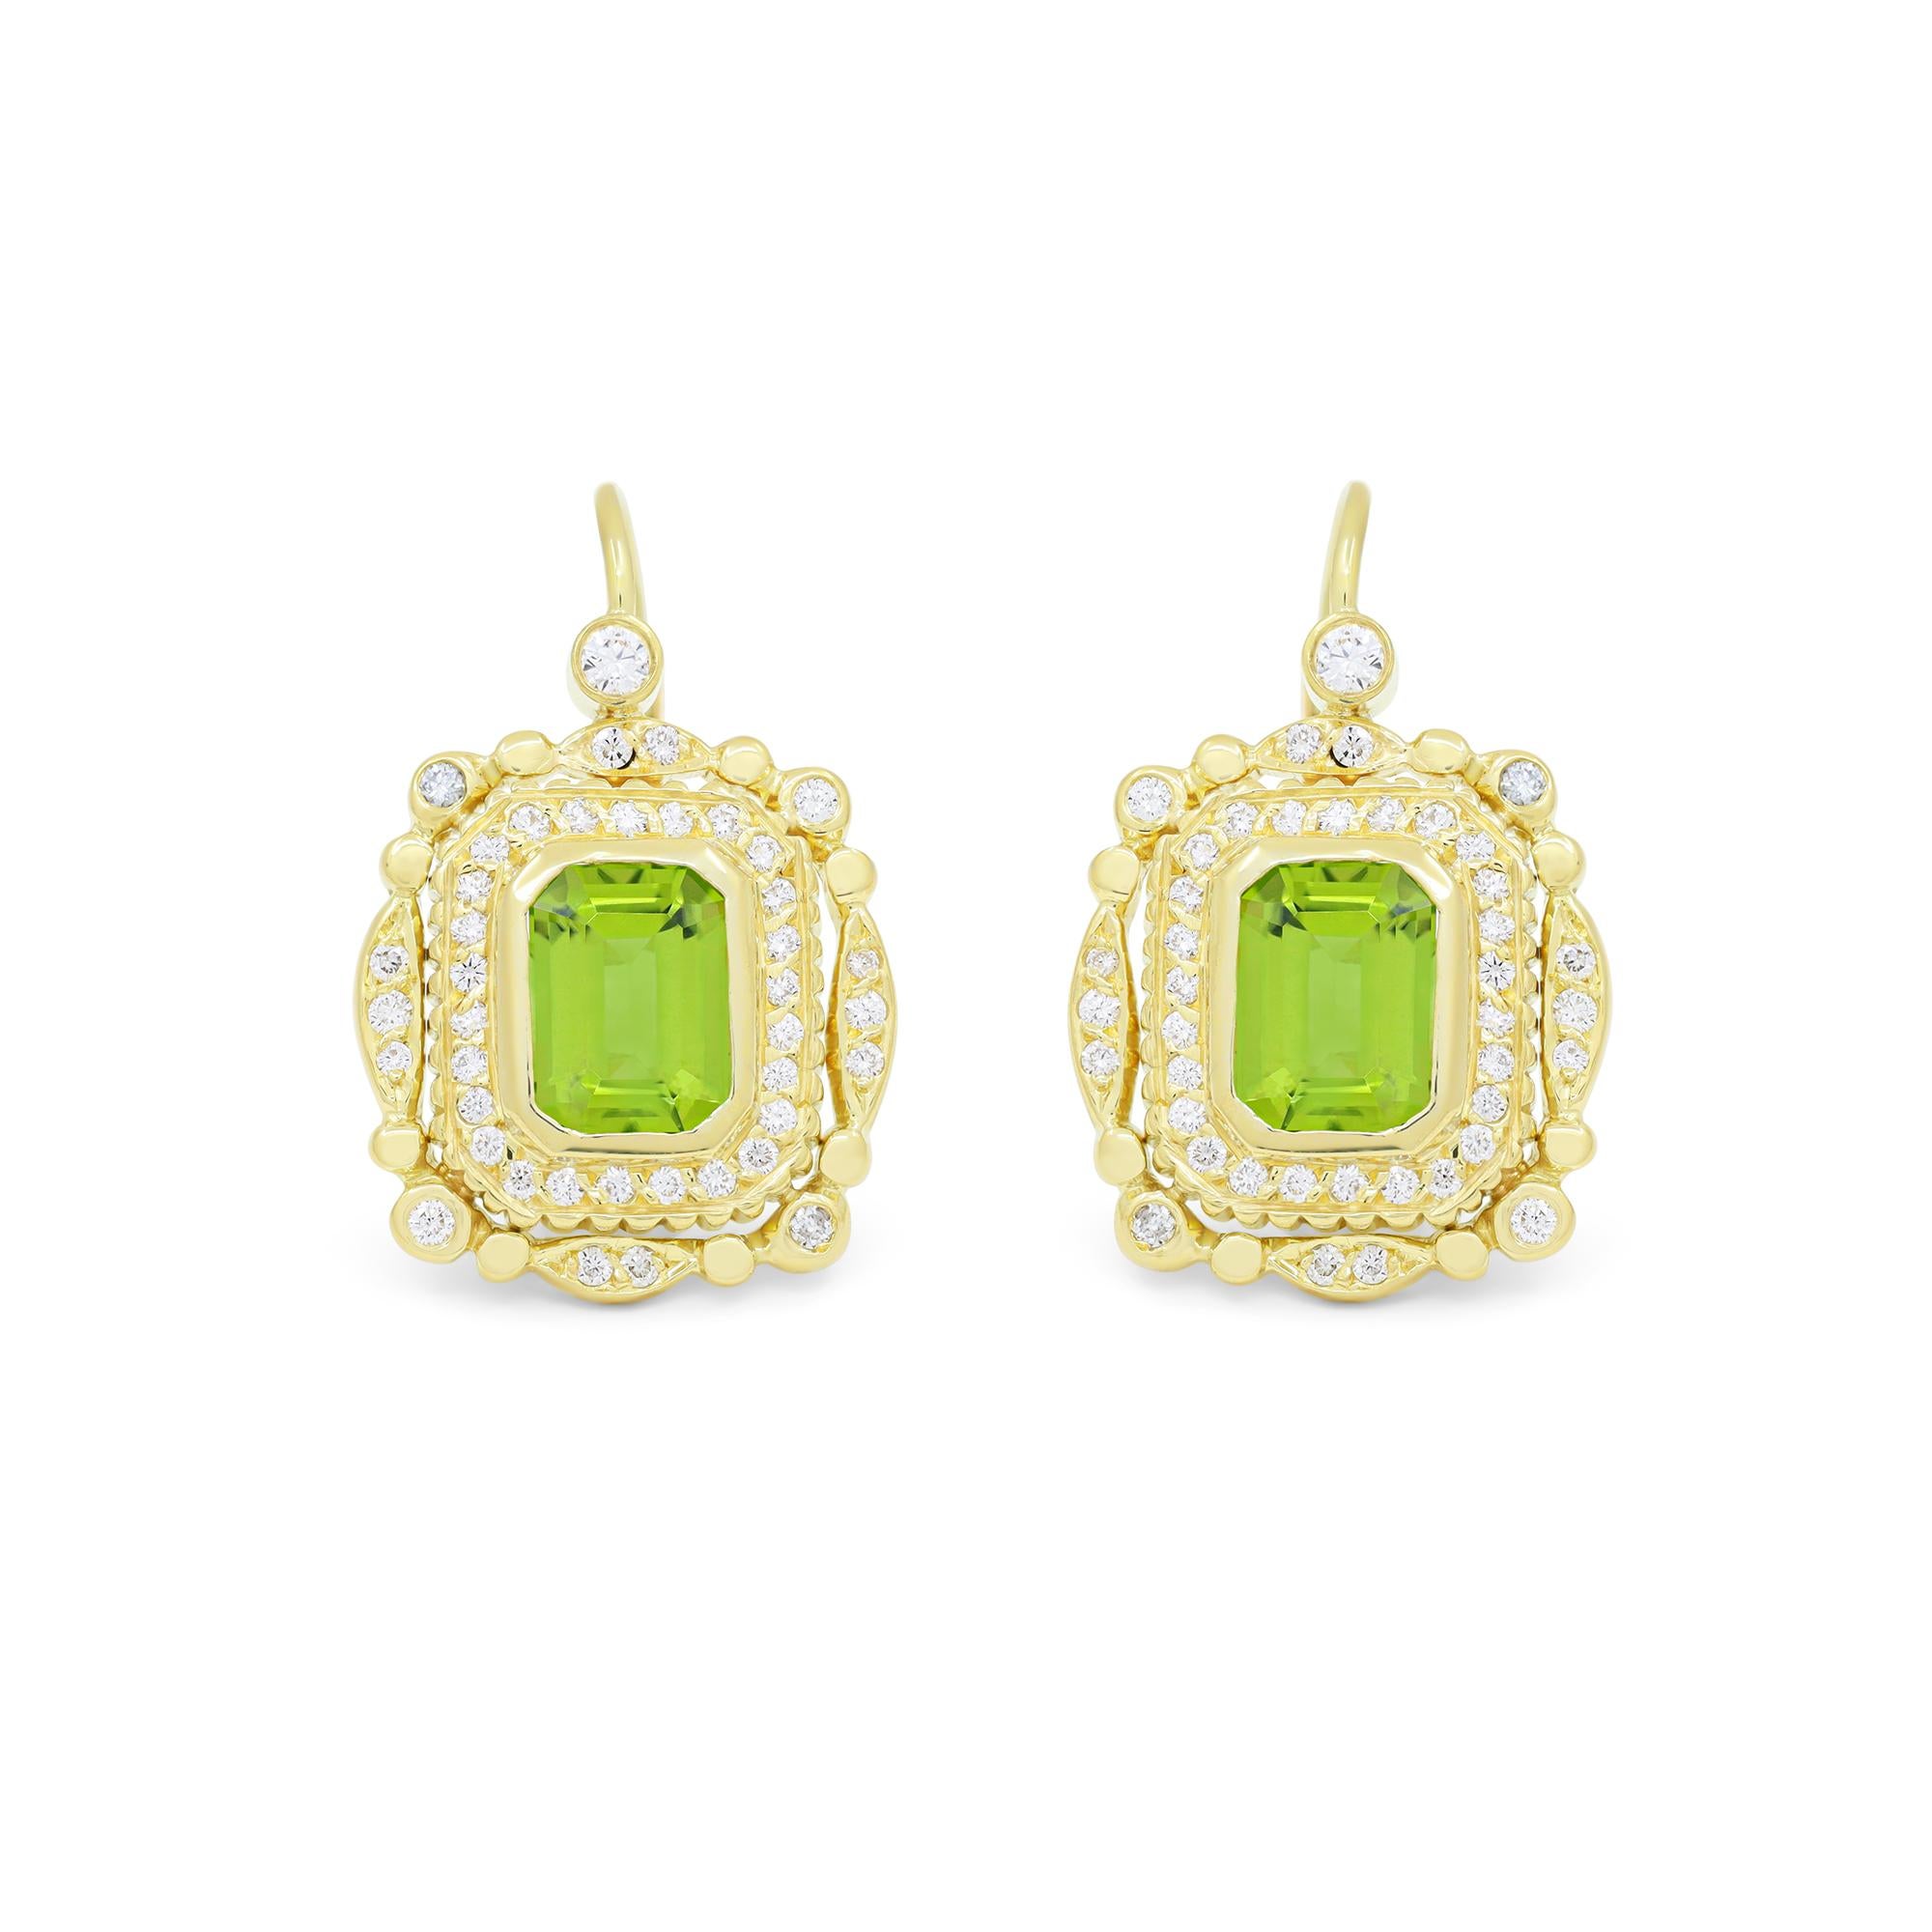 18KT yellow gold diamond peridot earrings 5.00cts of peridot with 1.50cts with lever back earrings

Diana M. is a leading supplier of top-quality fine jewelry for over 35 years.
Diana M is one-stop shop for all your jewelry shopping, carrying line